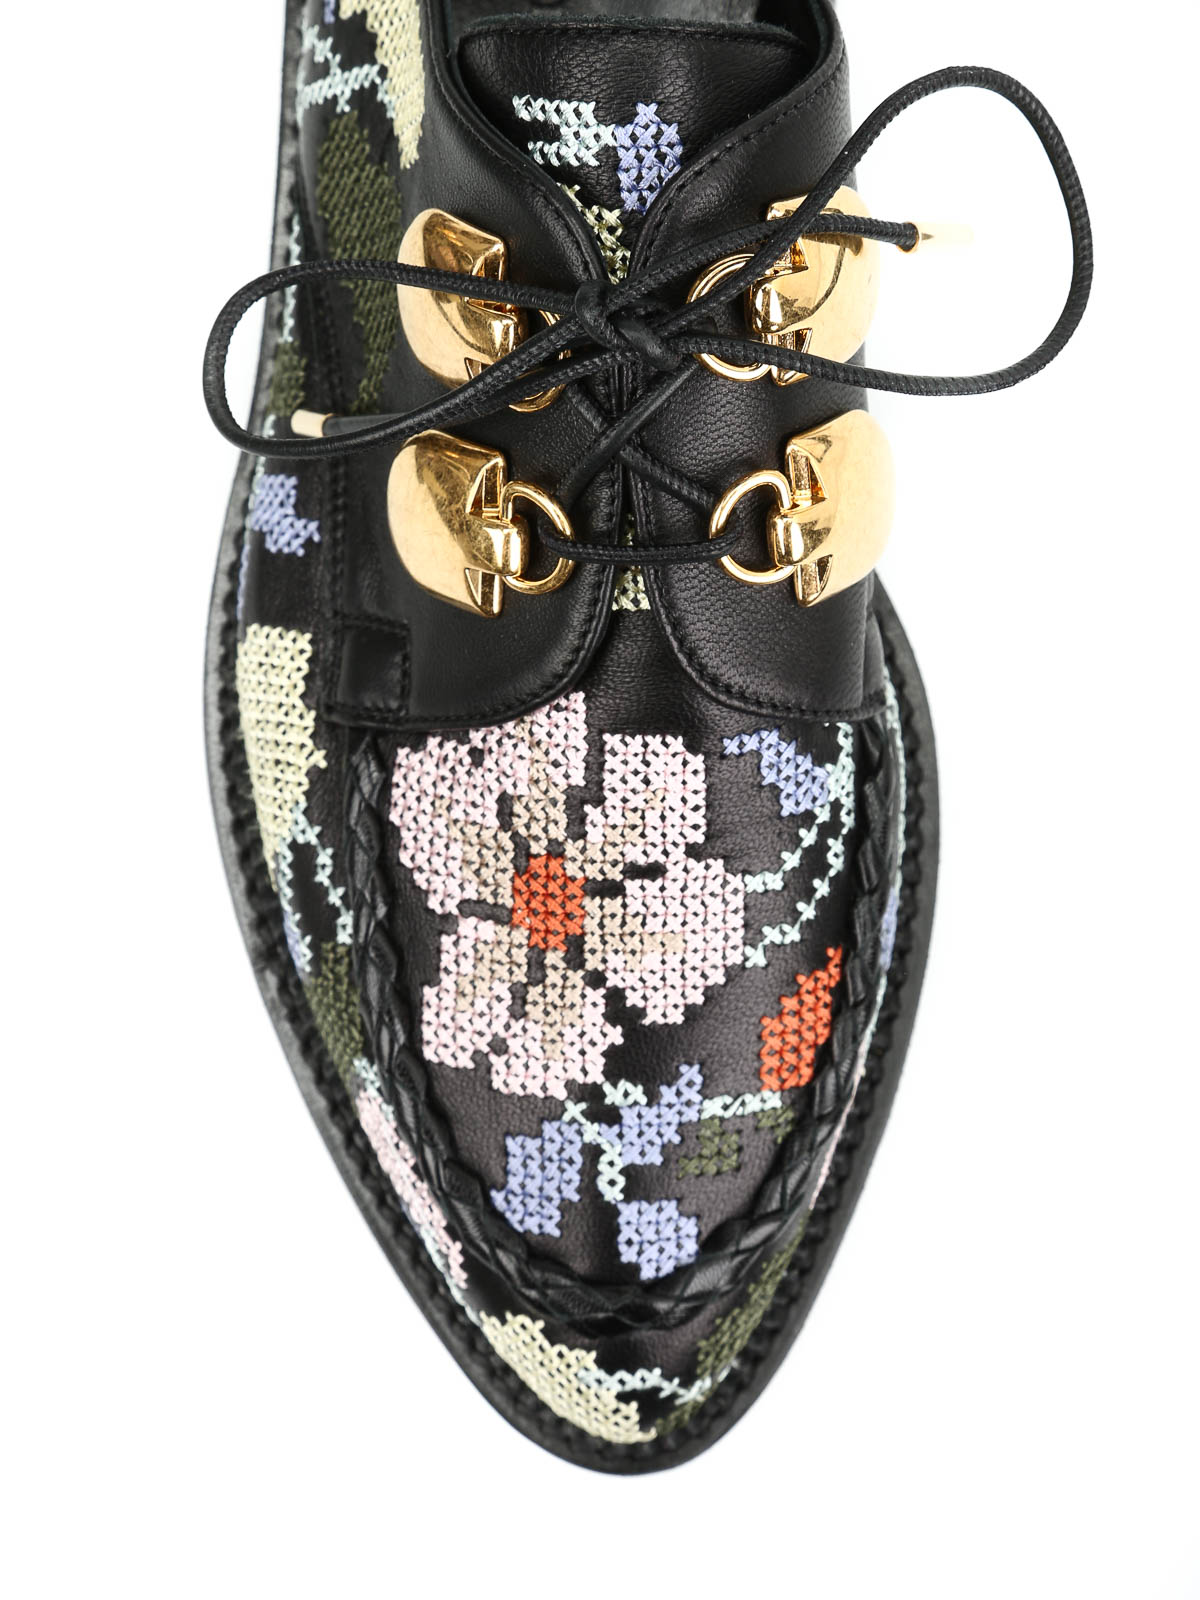 Lace-ups shoes Alexander Mcqueen - Nappa embroidered - 417148WHJI81049